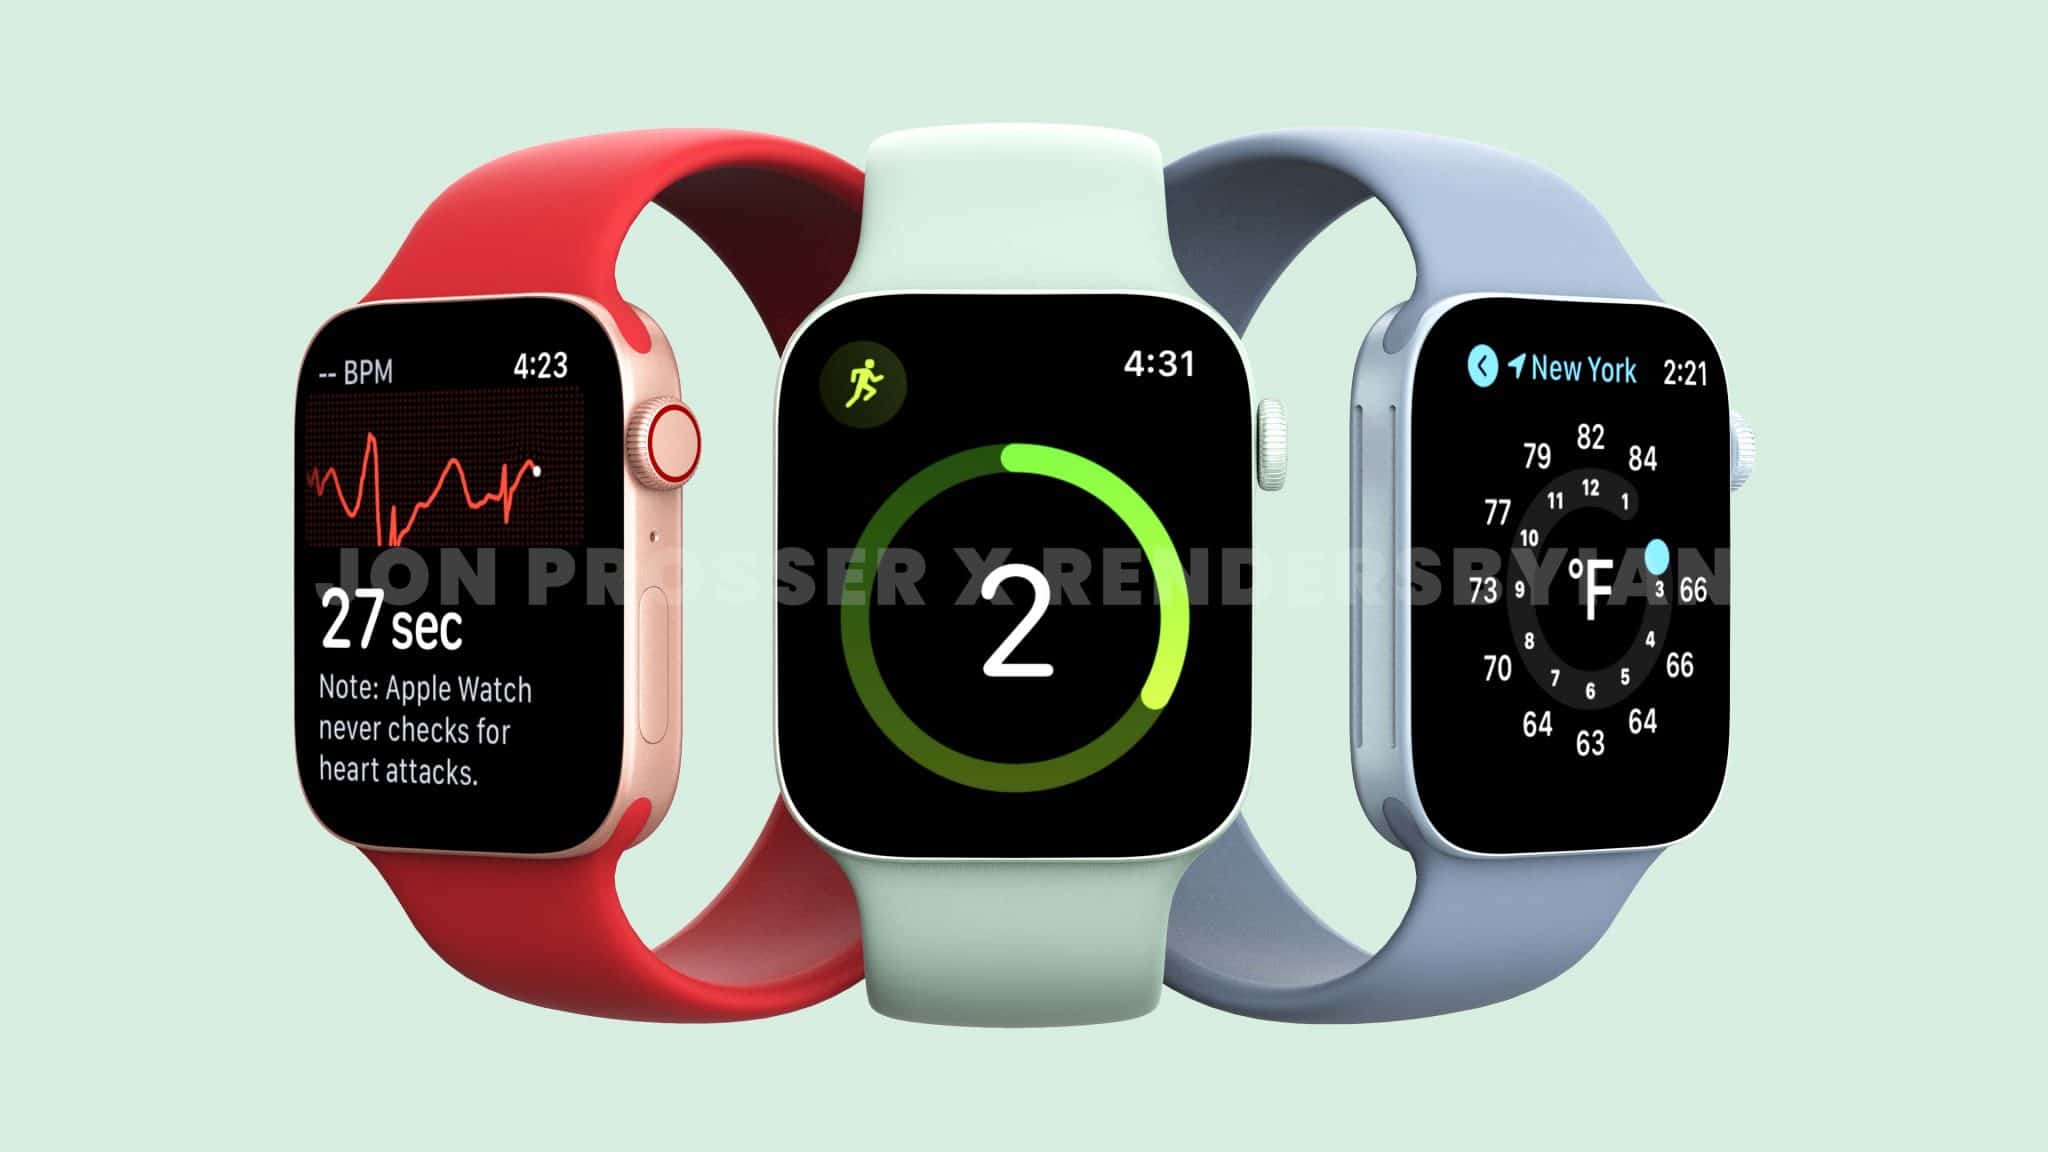 Rumor: Apple Watch Series 7 Could be Available in 41mm and 45mm Sizes